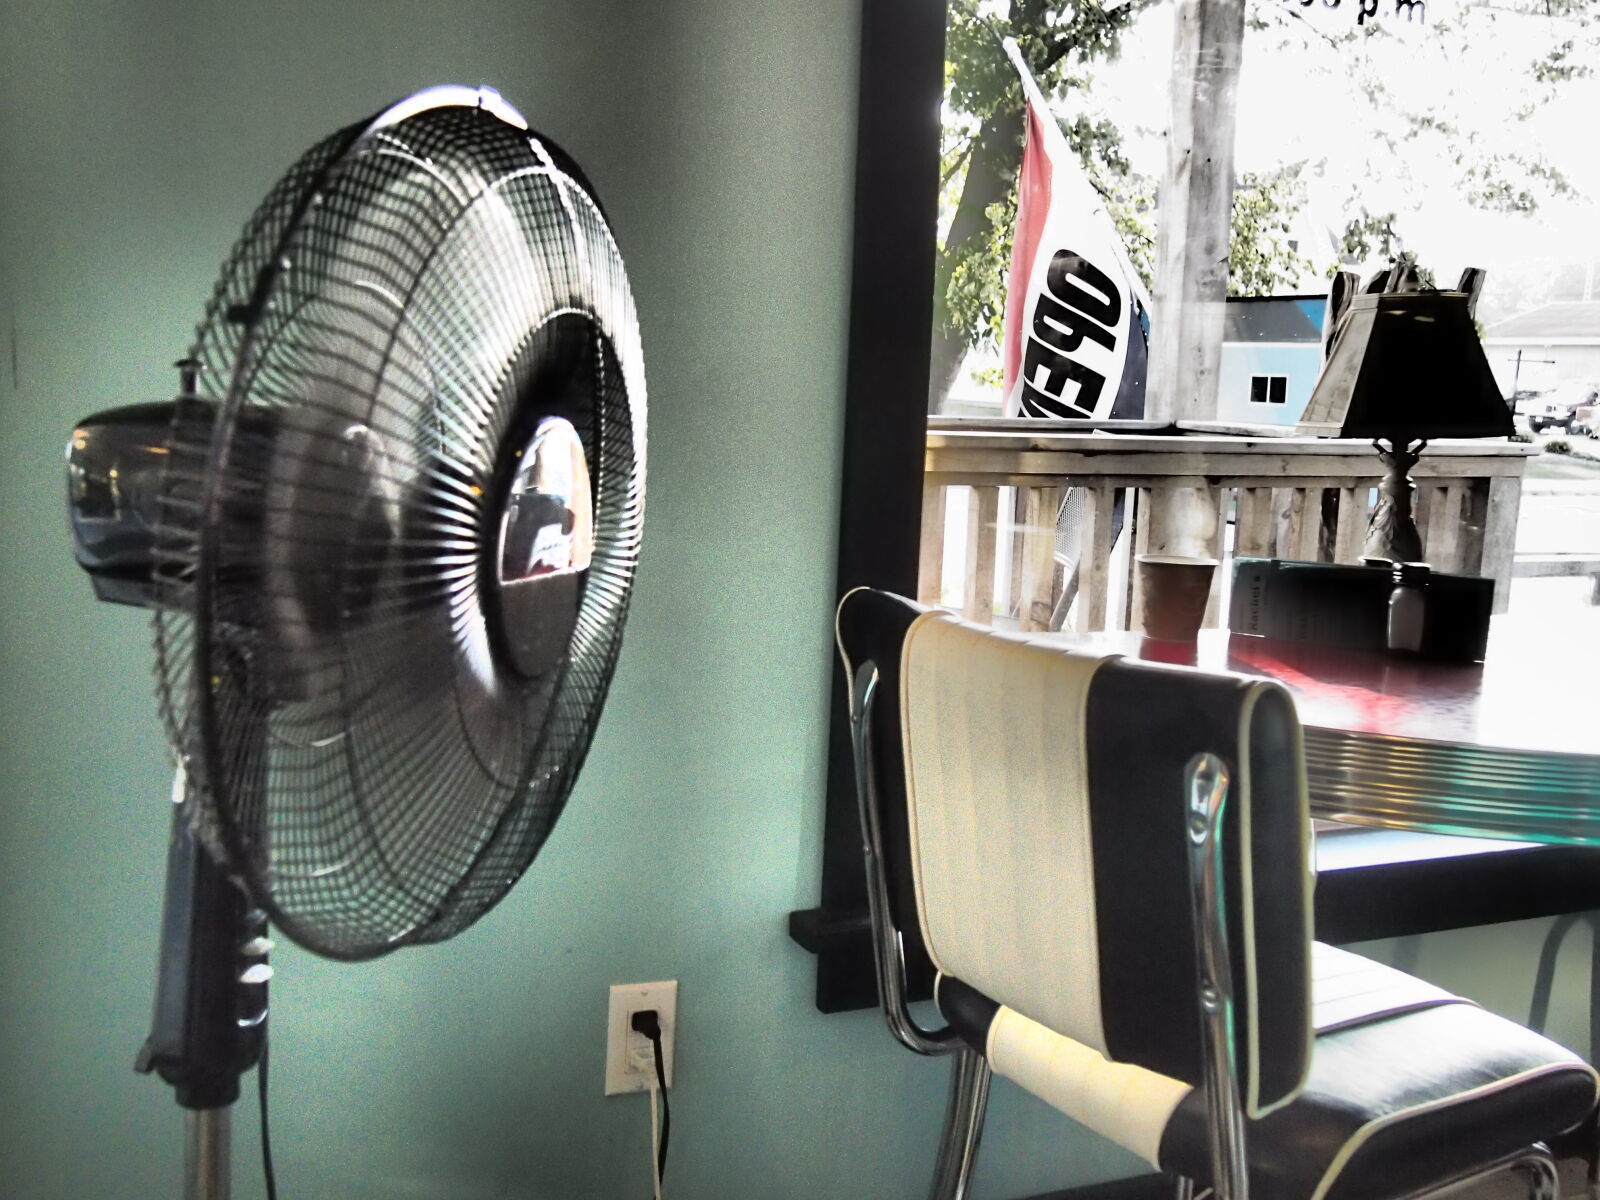 Olympus PEN E-PM1 sample photo. Chairs, diner, fan, summer photography